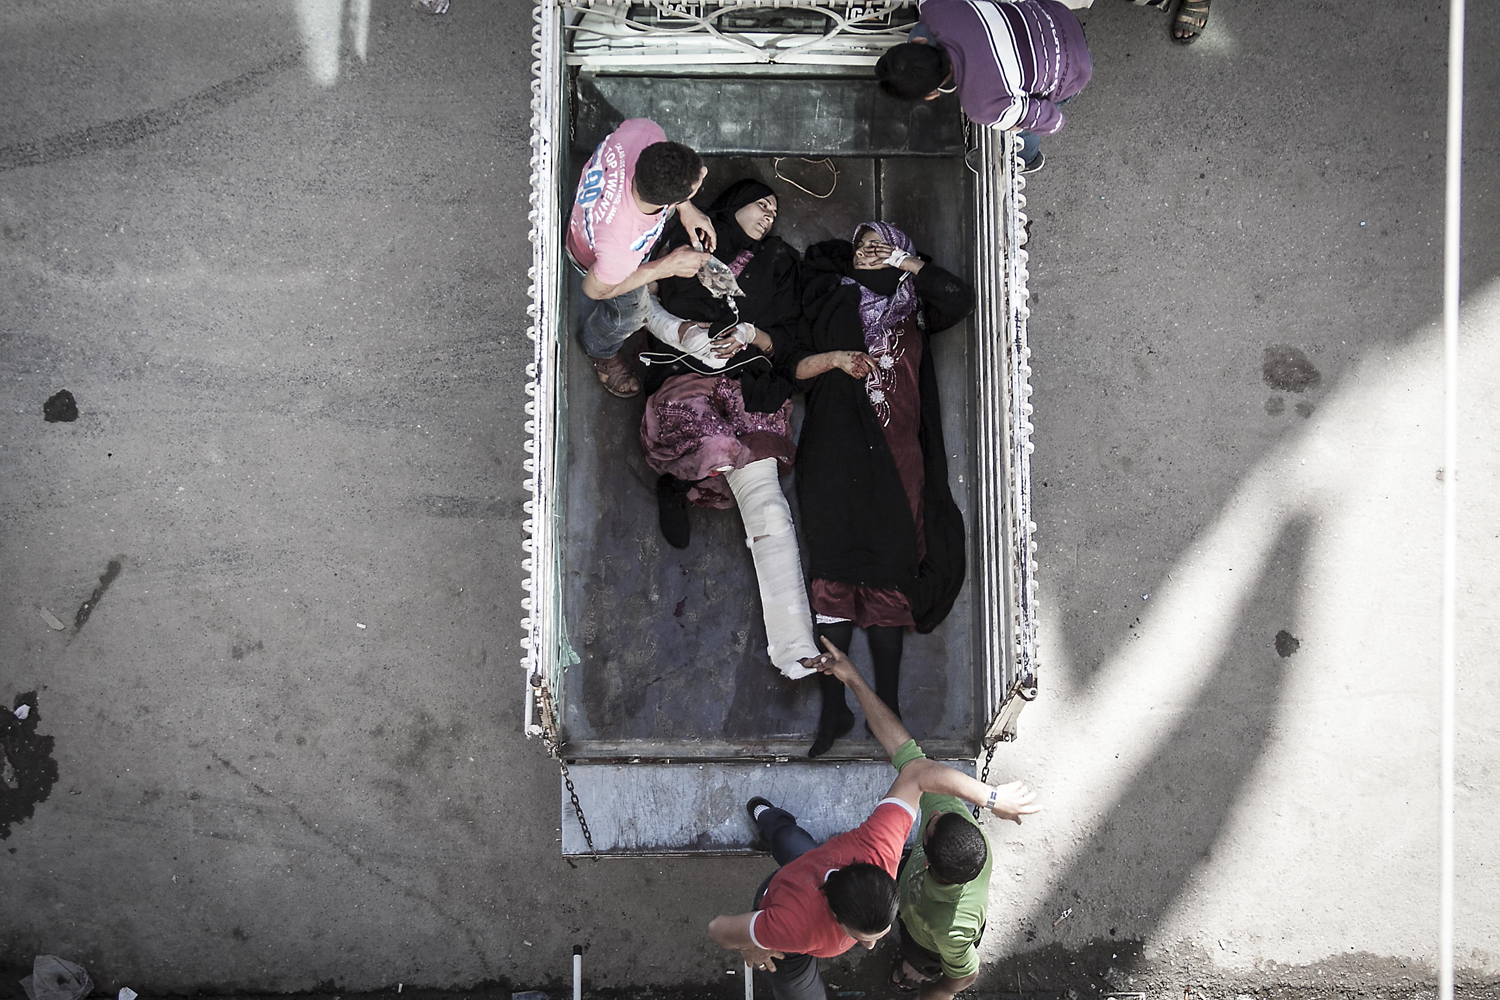 Image: Oct. 21, 2012. Women civilians lay in the back of a truck as they are removed from a hospital in the Tarik Al Bab neighborhood, after they were injured by aircraft strike on a highway in Aleppo, Syria.